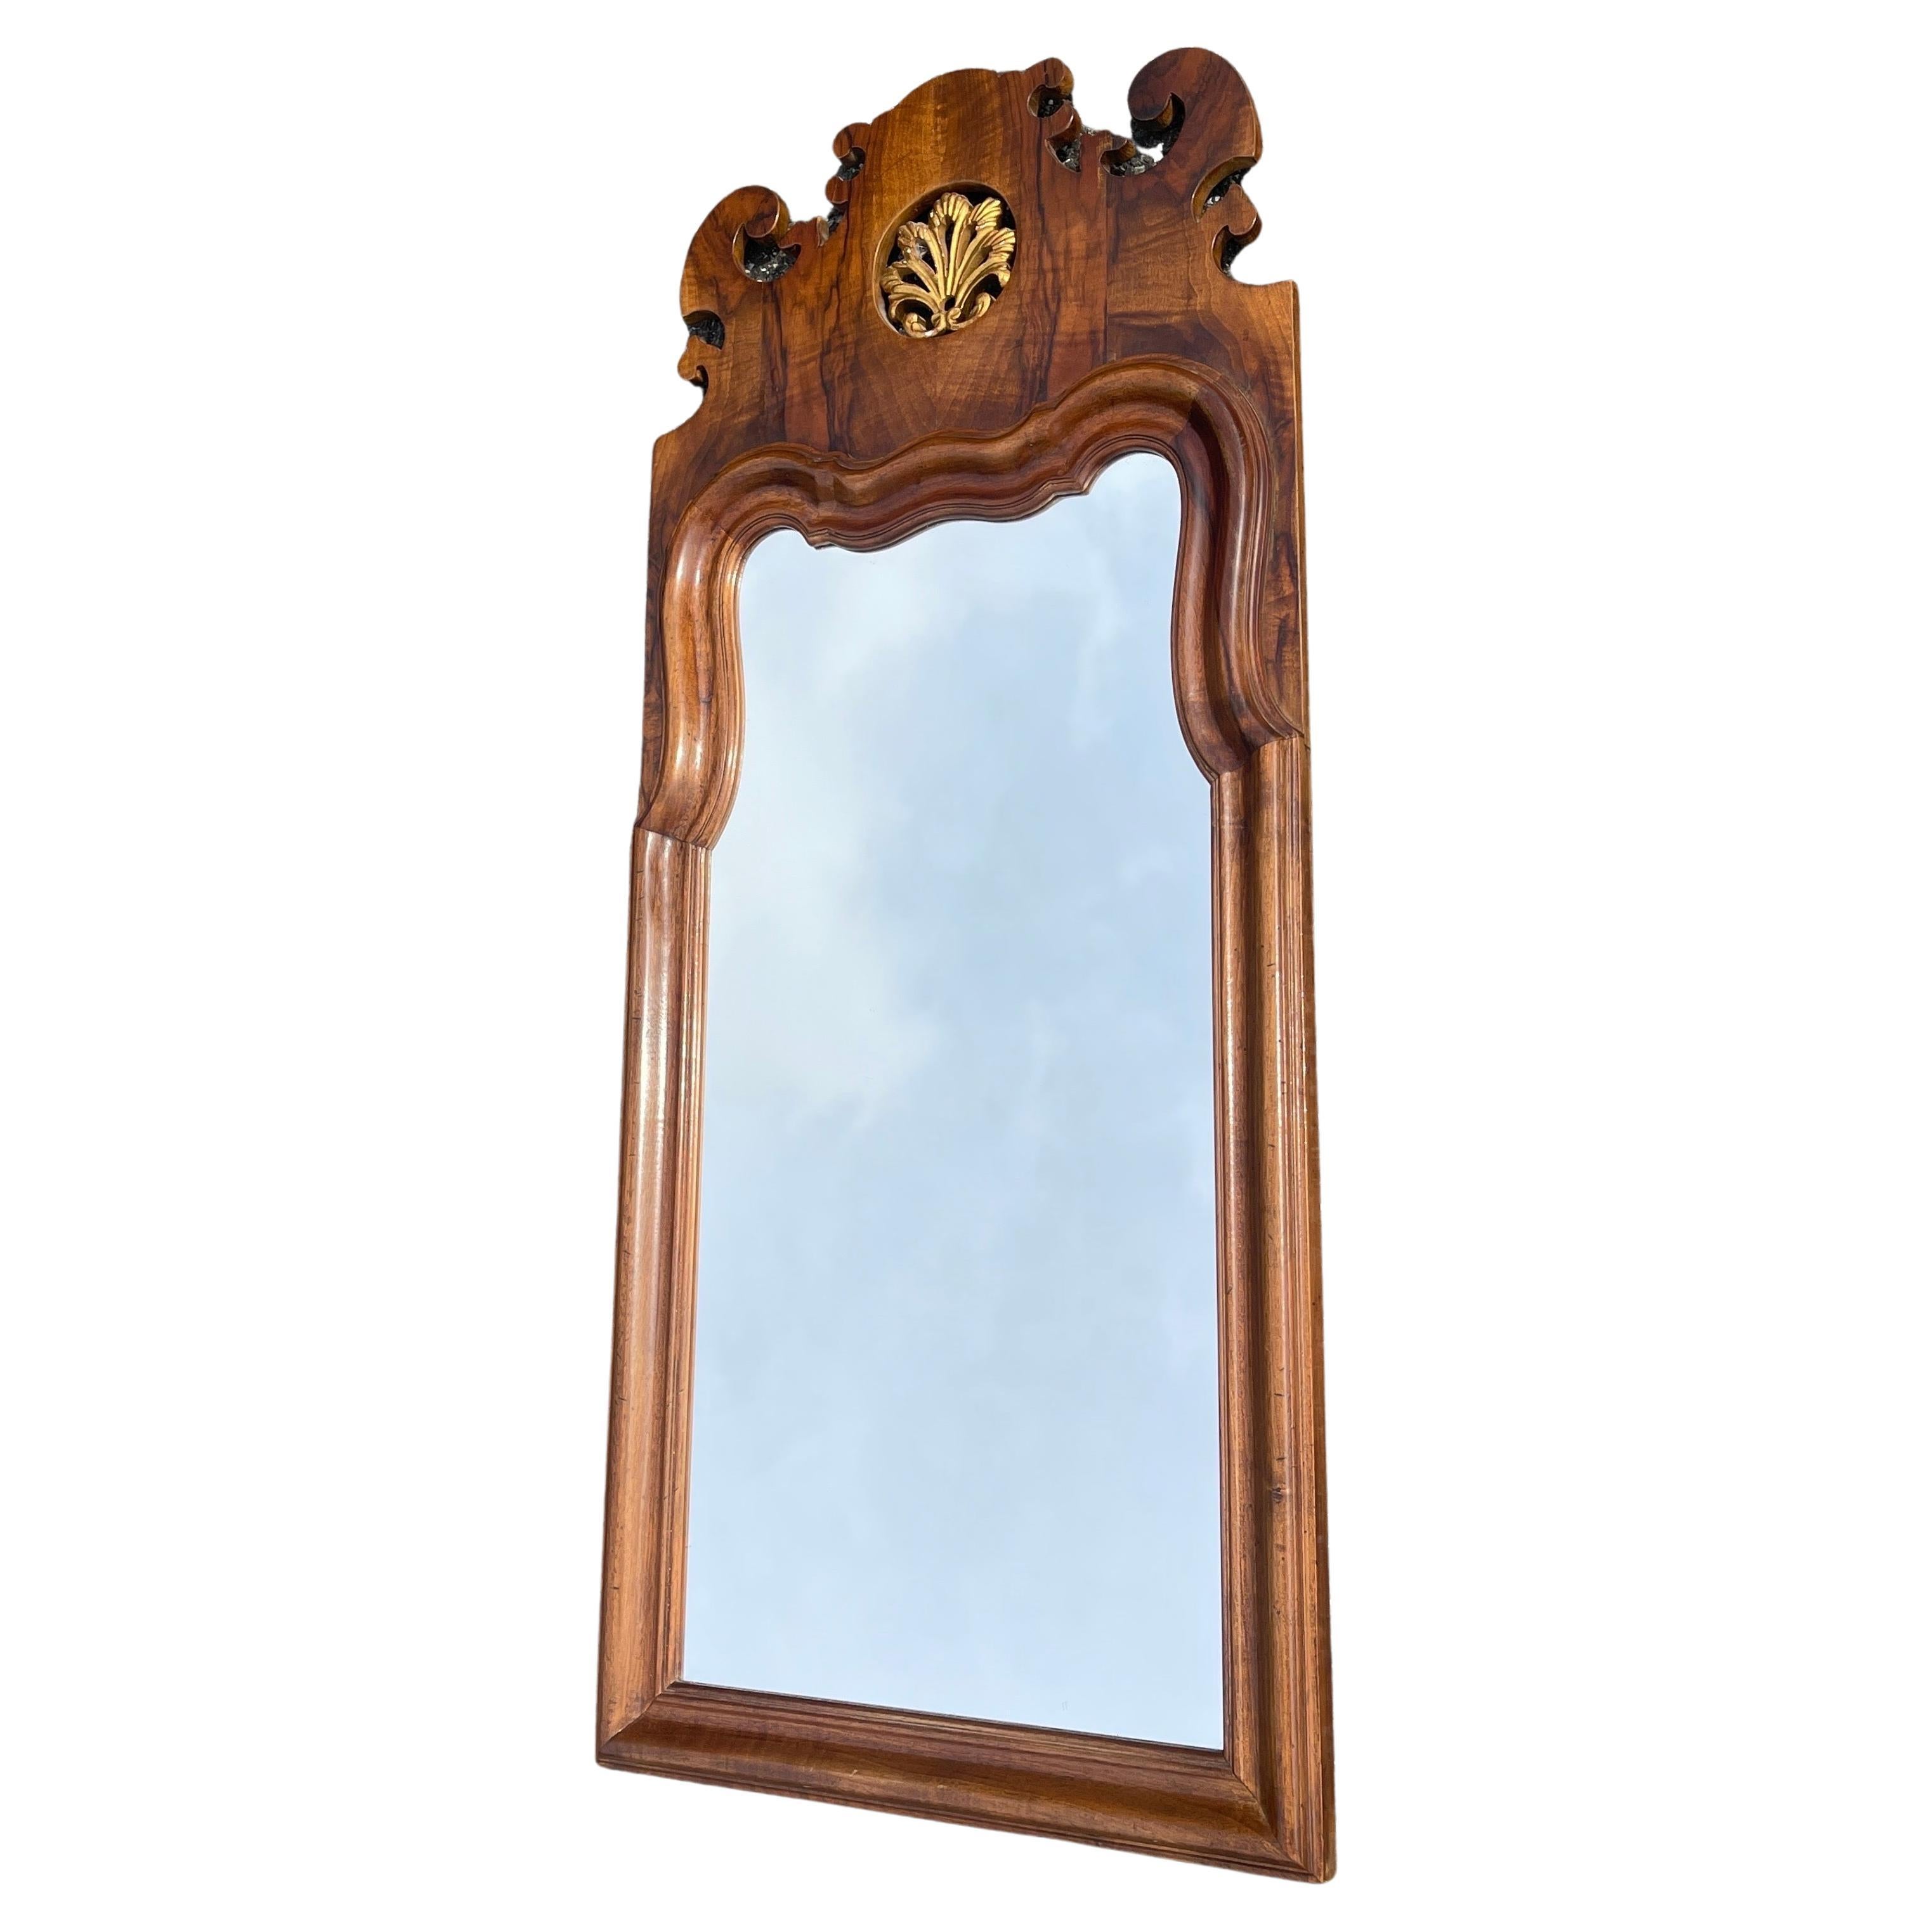 1960's Walnut Veneer Rococo Style Mirror, Italy 

A Rococo-style mirror from the 1960’s. Rococo is a highly ornamental and decorative style characterized by intricate details, asymmetrical forms, and natural motifs. It was prominent in the mid to